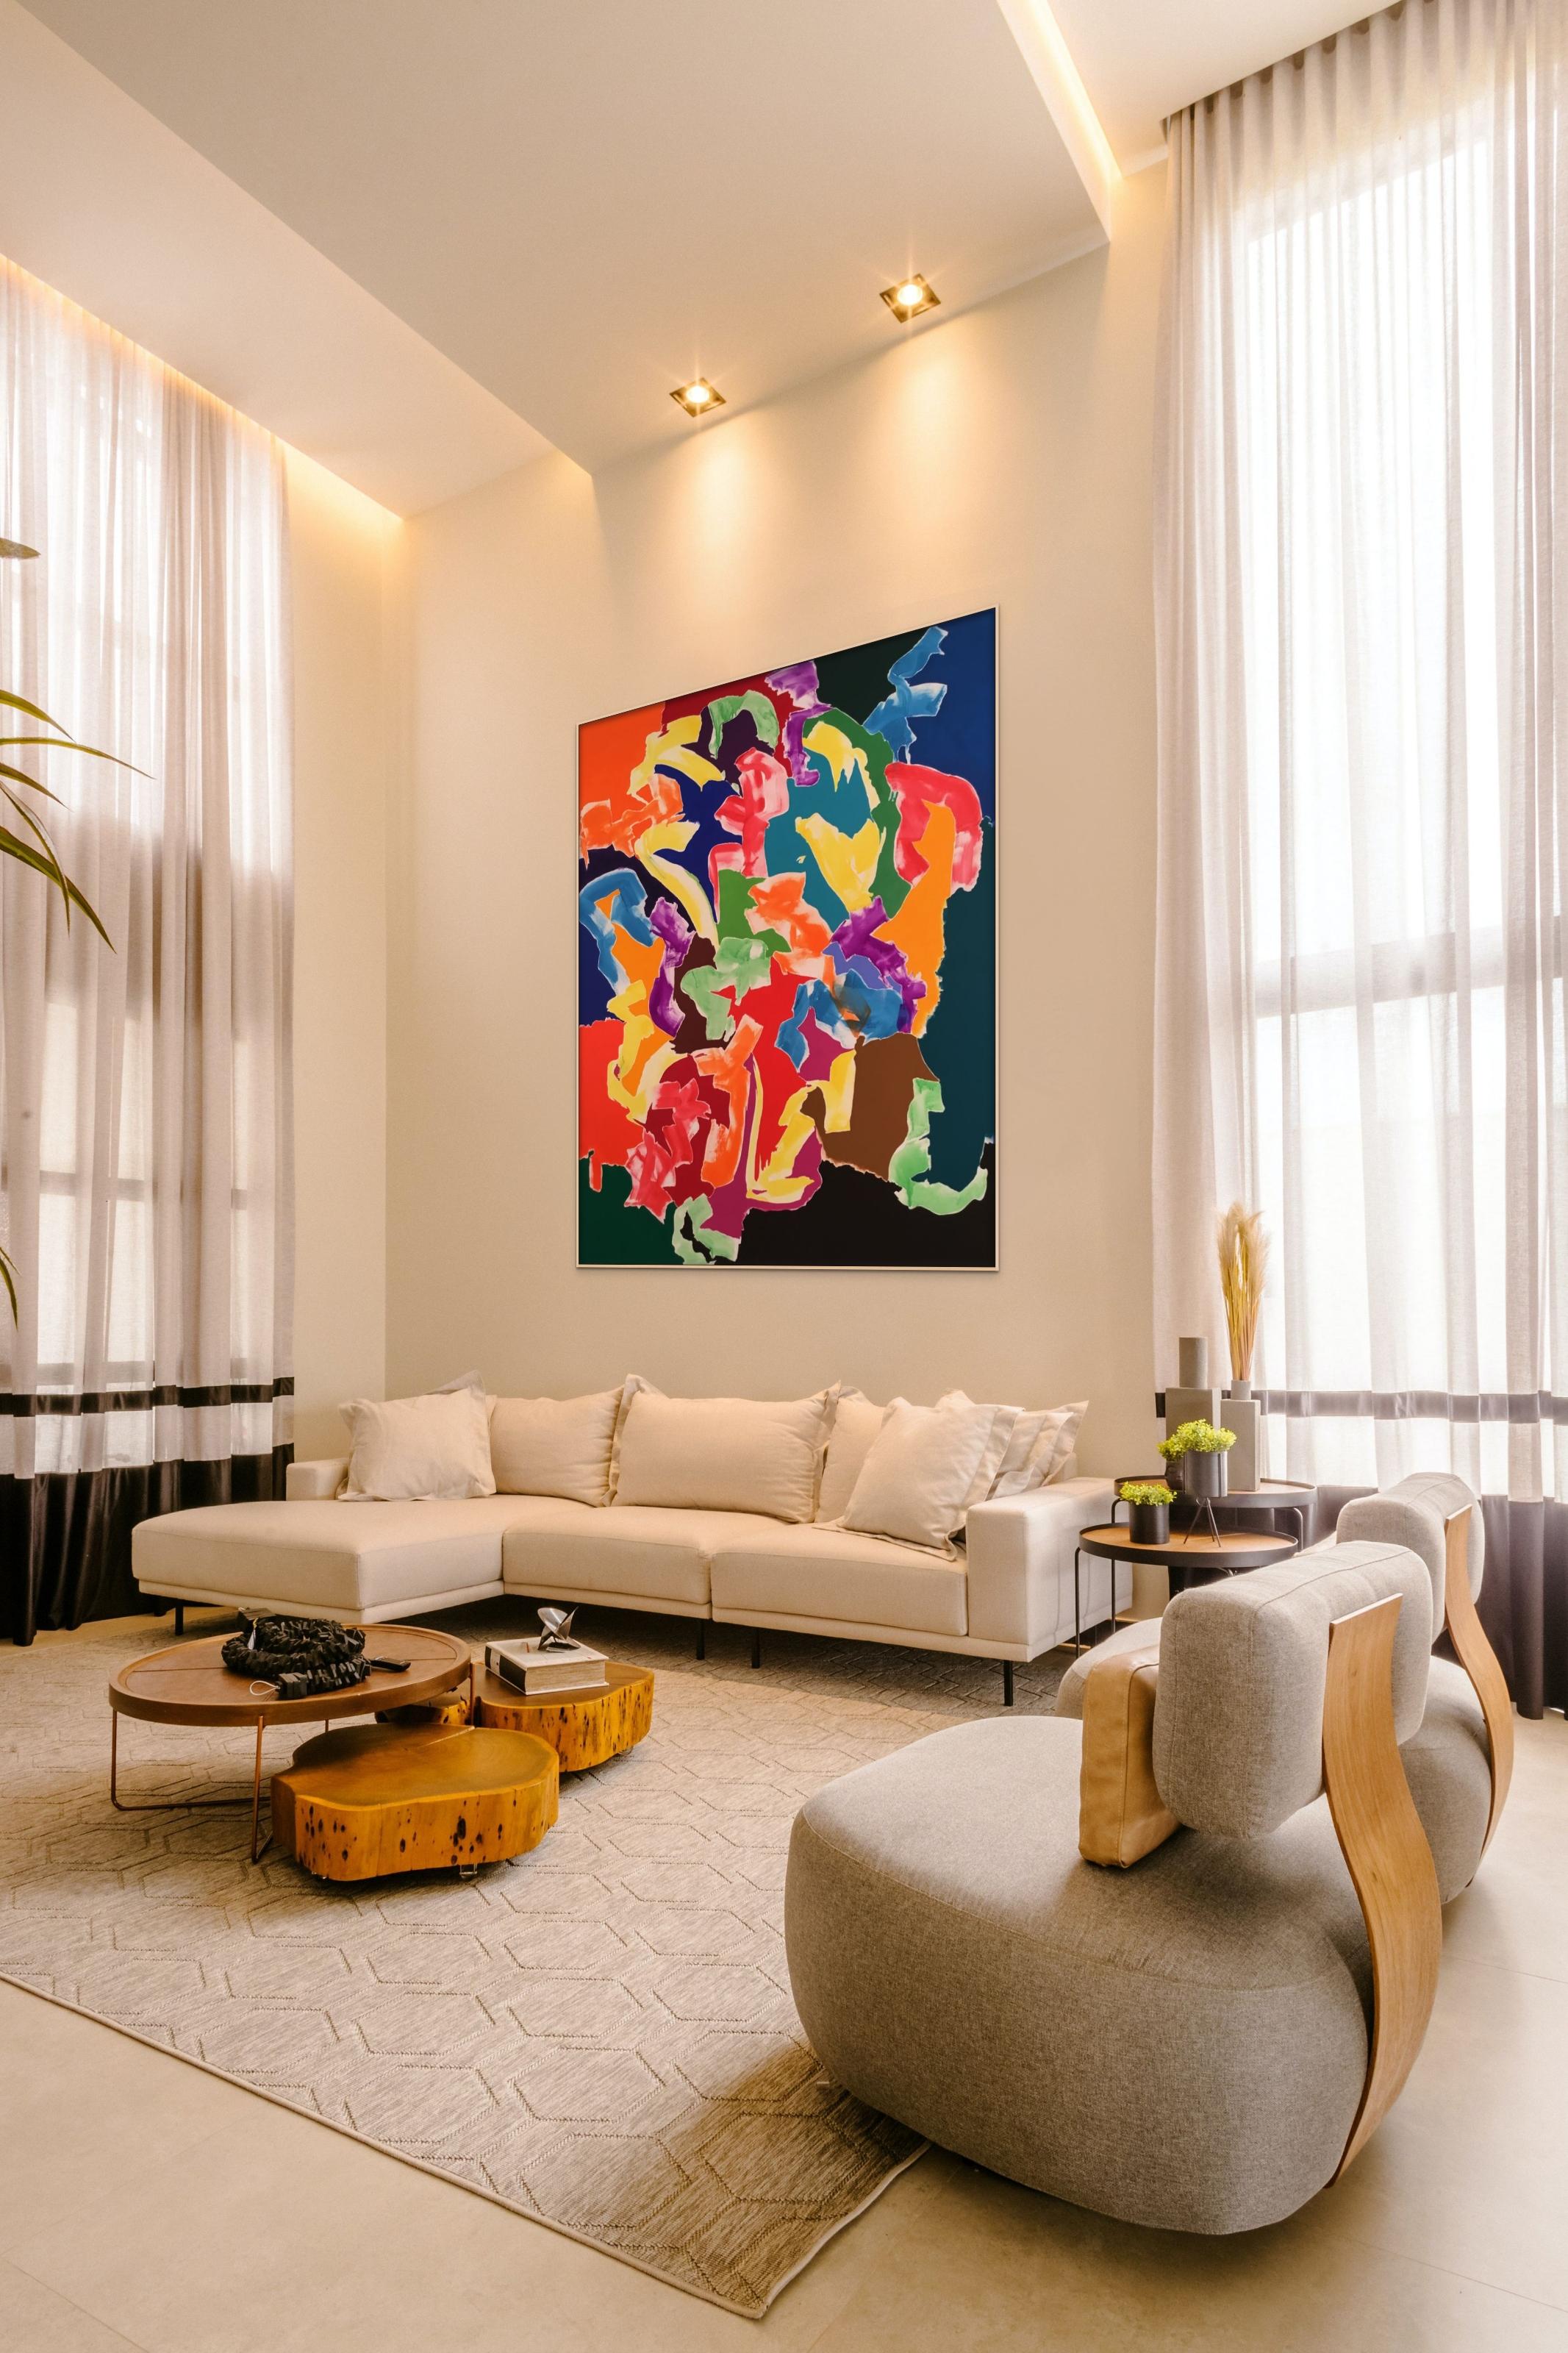 School Of Paris - Large Scale Contemporary Modern Abstract Oil Painting  - Orange Abstract Painting by David Headley